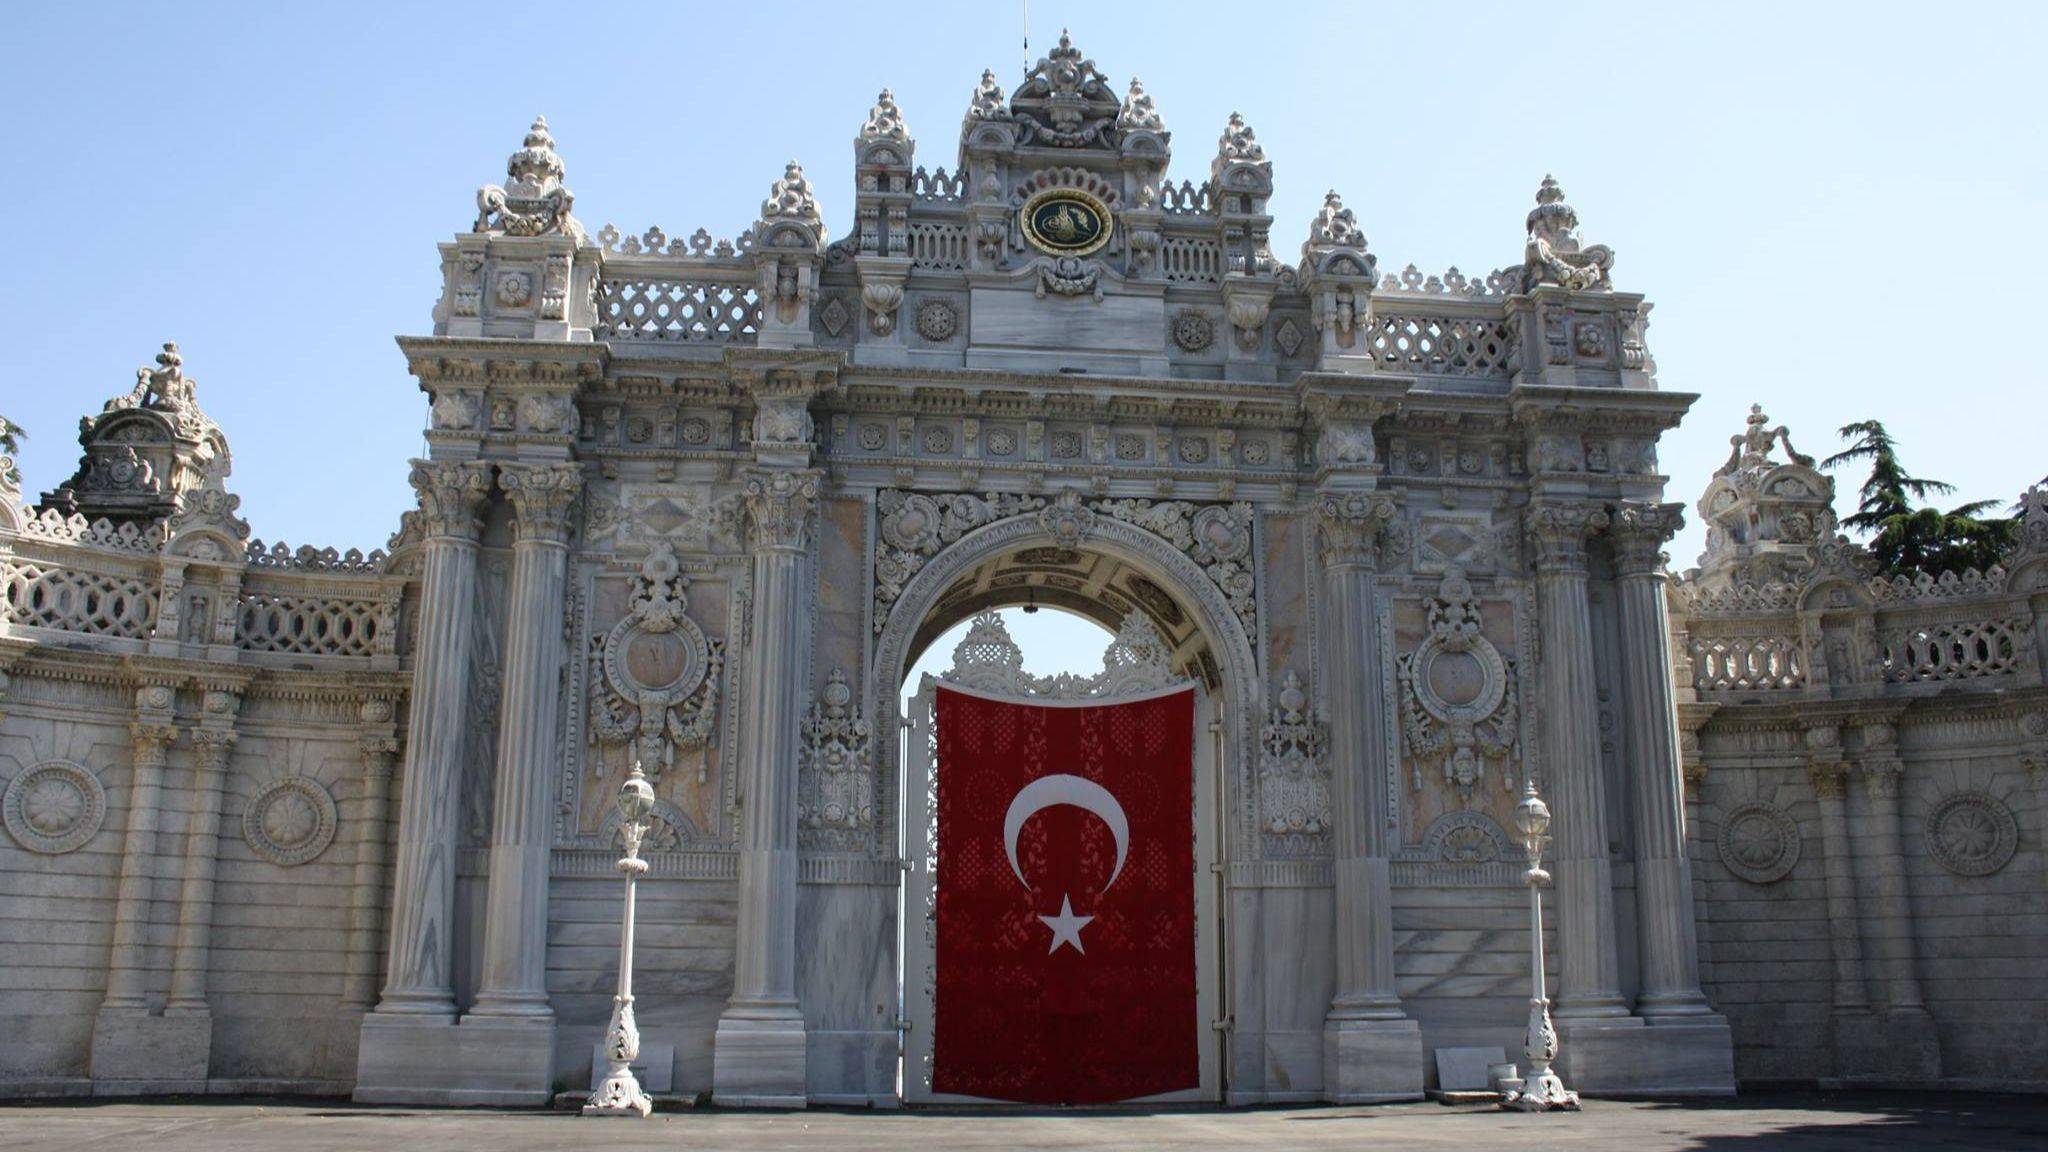 The entrance gate to Dolmabahce Palace, constructed in the 19th century and designed by the architects of Sultan Abdulmejid